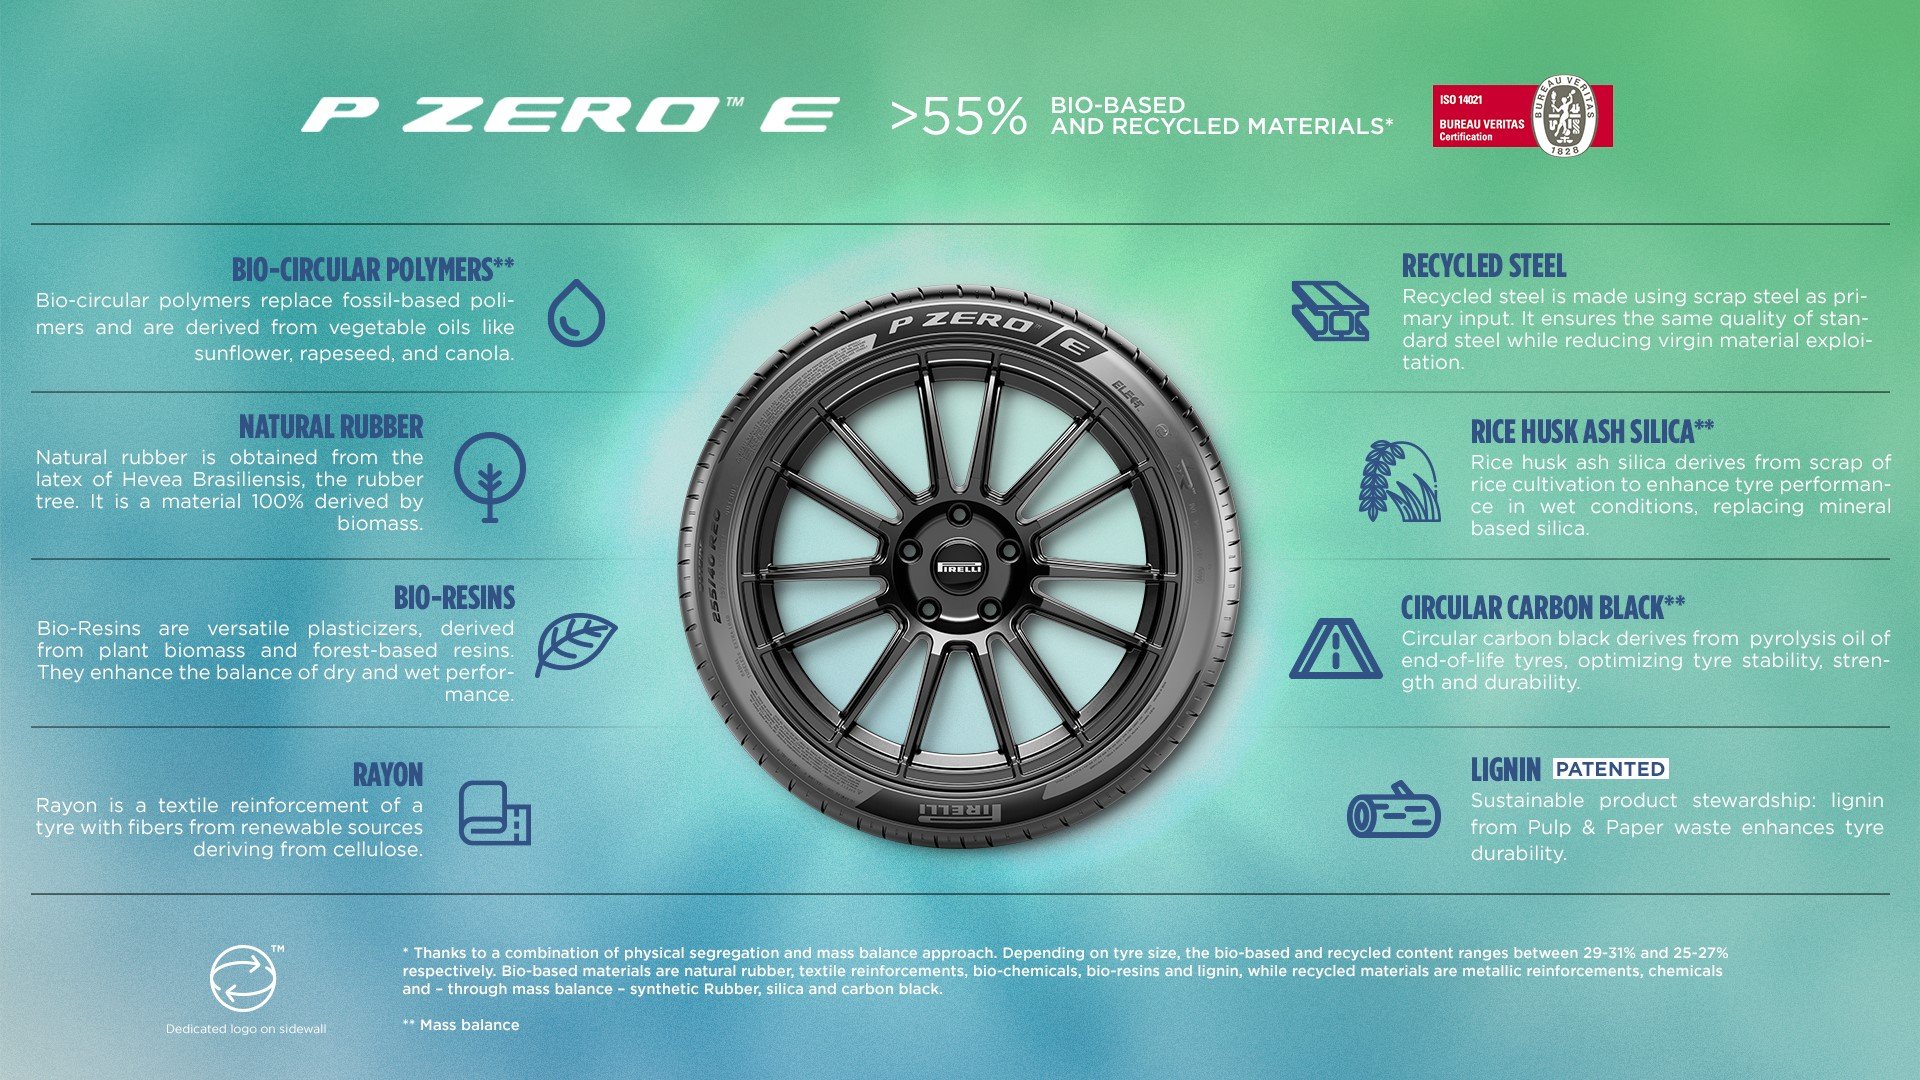 PIRELLI LAUNCHES THE P ZERO E: THE SPORTING TYRE THAT’S A CHAMPION OF TECHNOLOGY AND SUSTAINABILITY